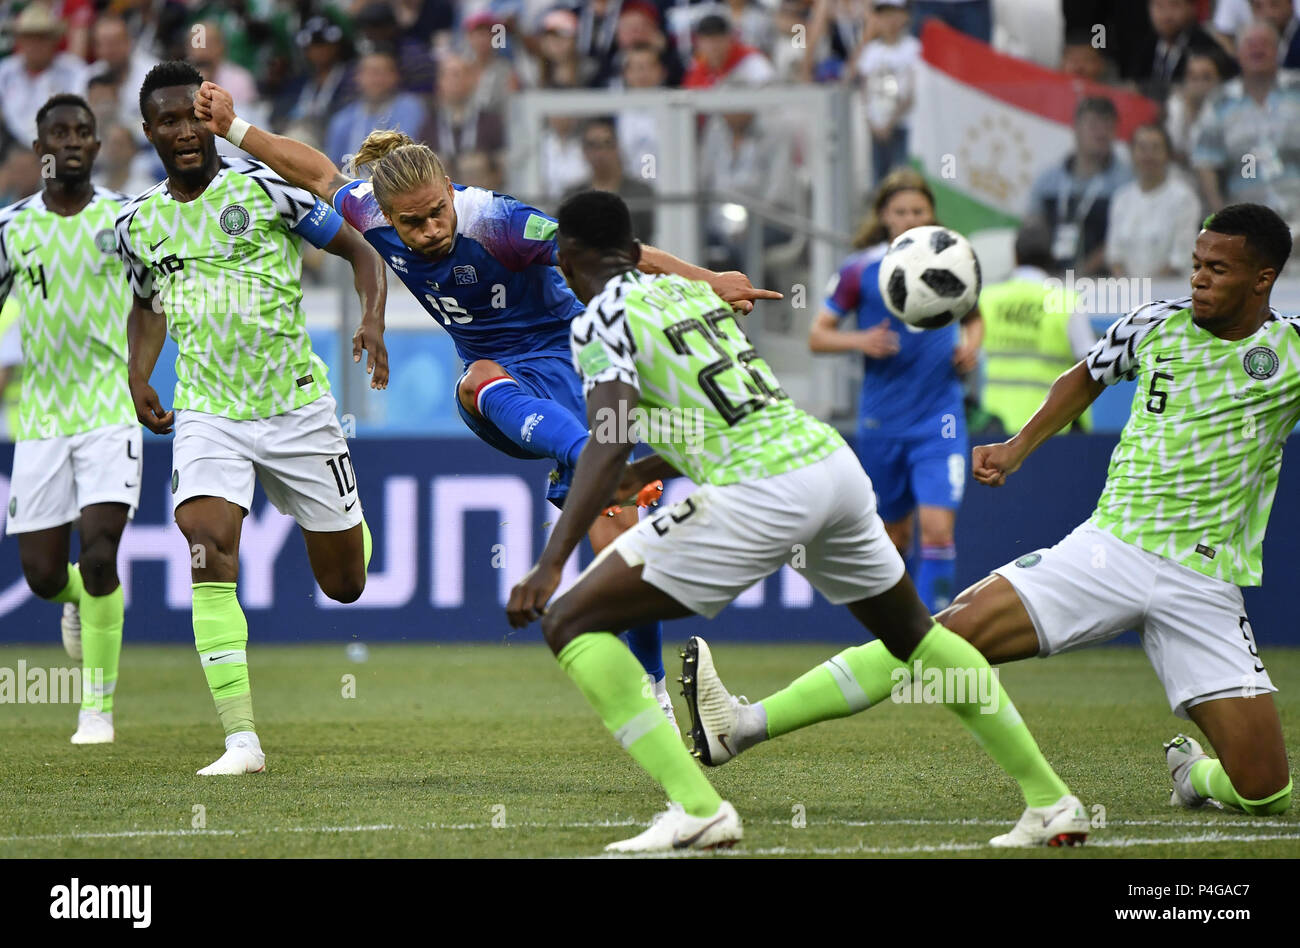 Volgograd, Russia. 22nd June, 2018. Rurik Gislason (C) of Iceland shoots during the 2018 FIFA World Cup Group D match between Nigeria and Iceland in Volgograd, Russia, June 22, 2018. Nigeria won 2-0. Credit: He Canling/Xinhua/Alamy Live News Stock Photo